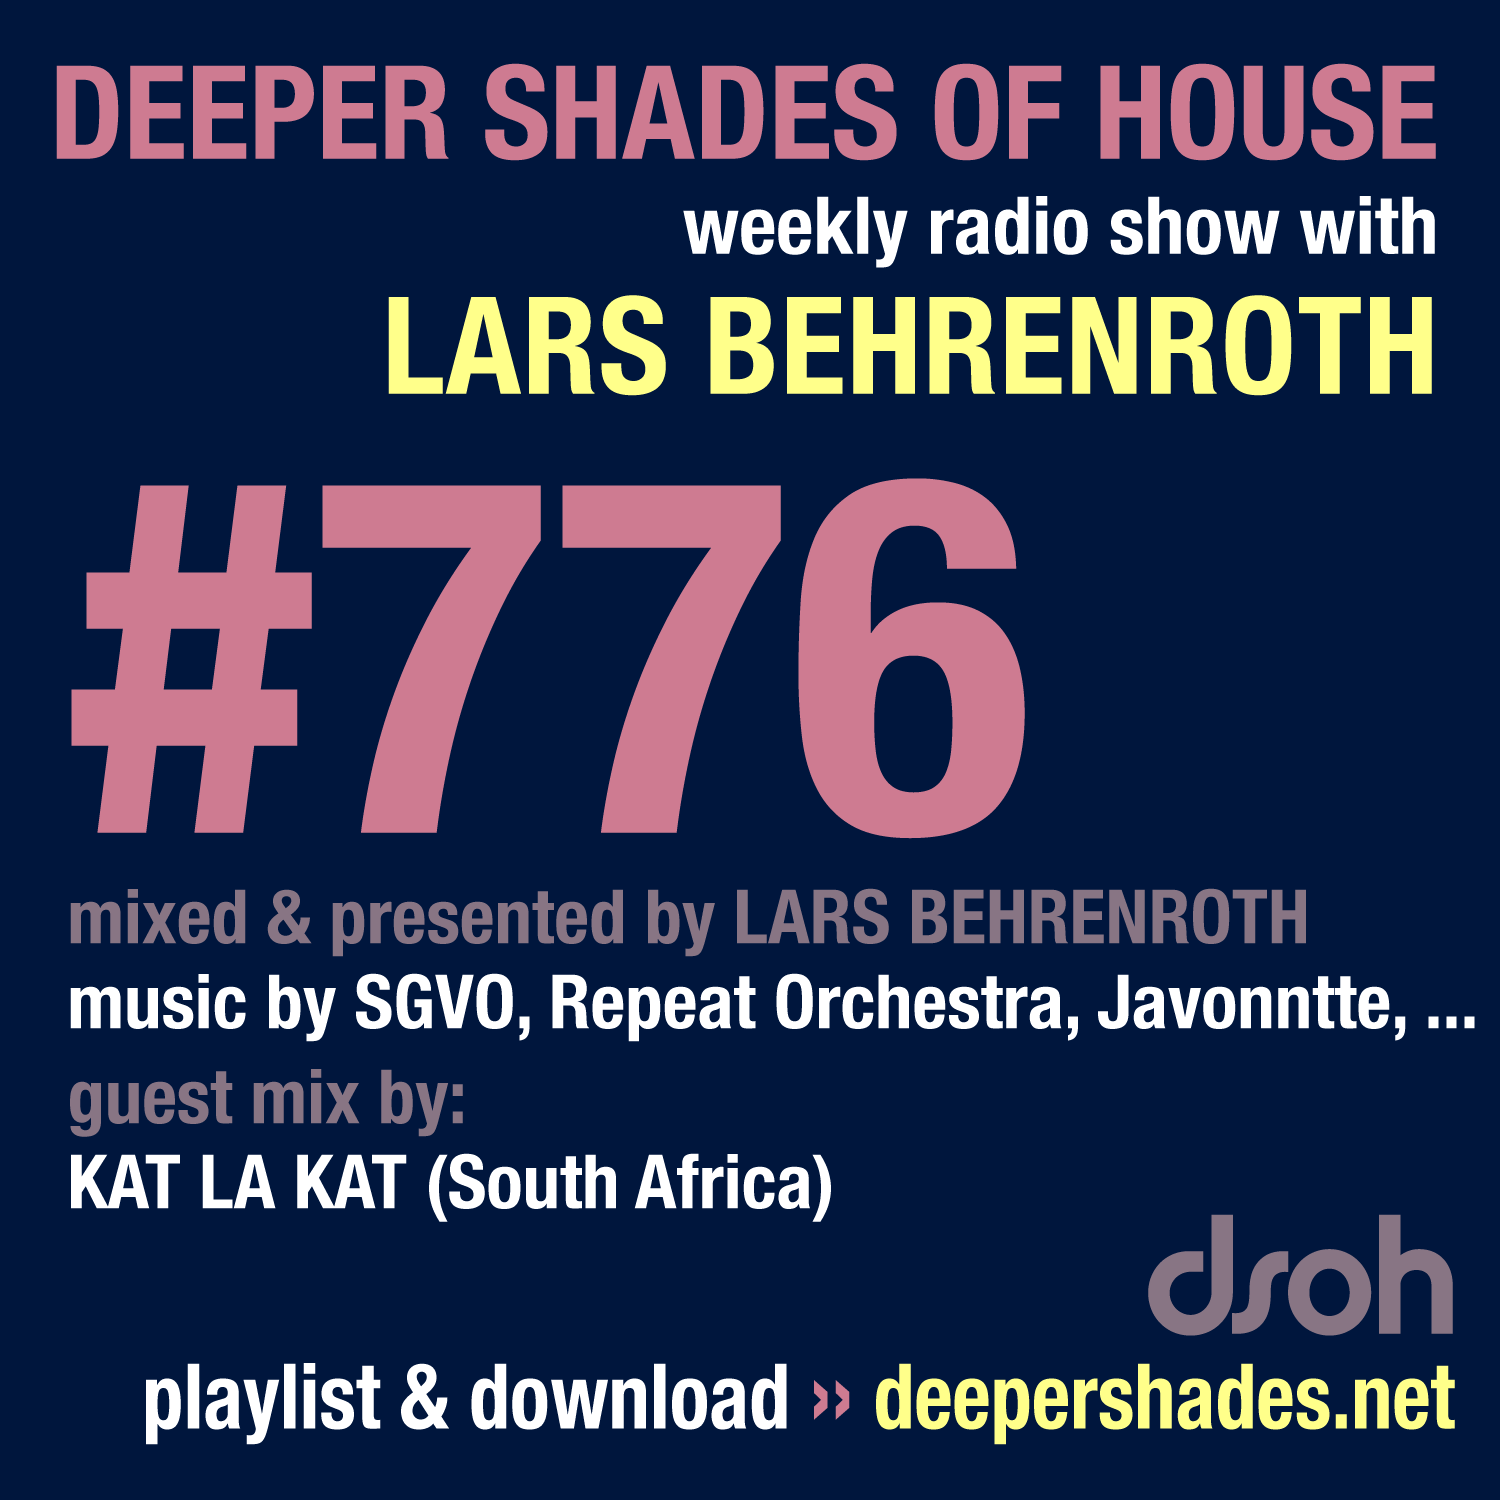 Deeper Shades Of House 776